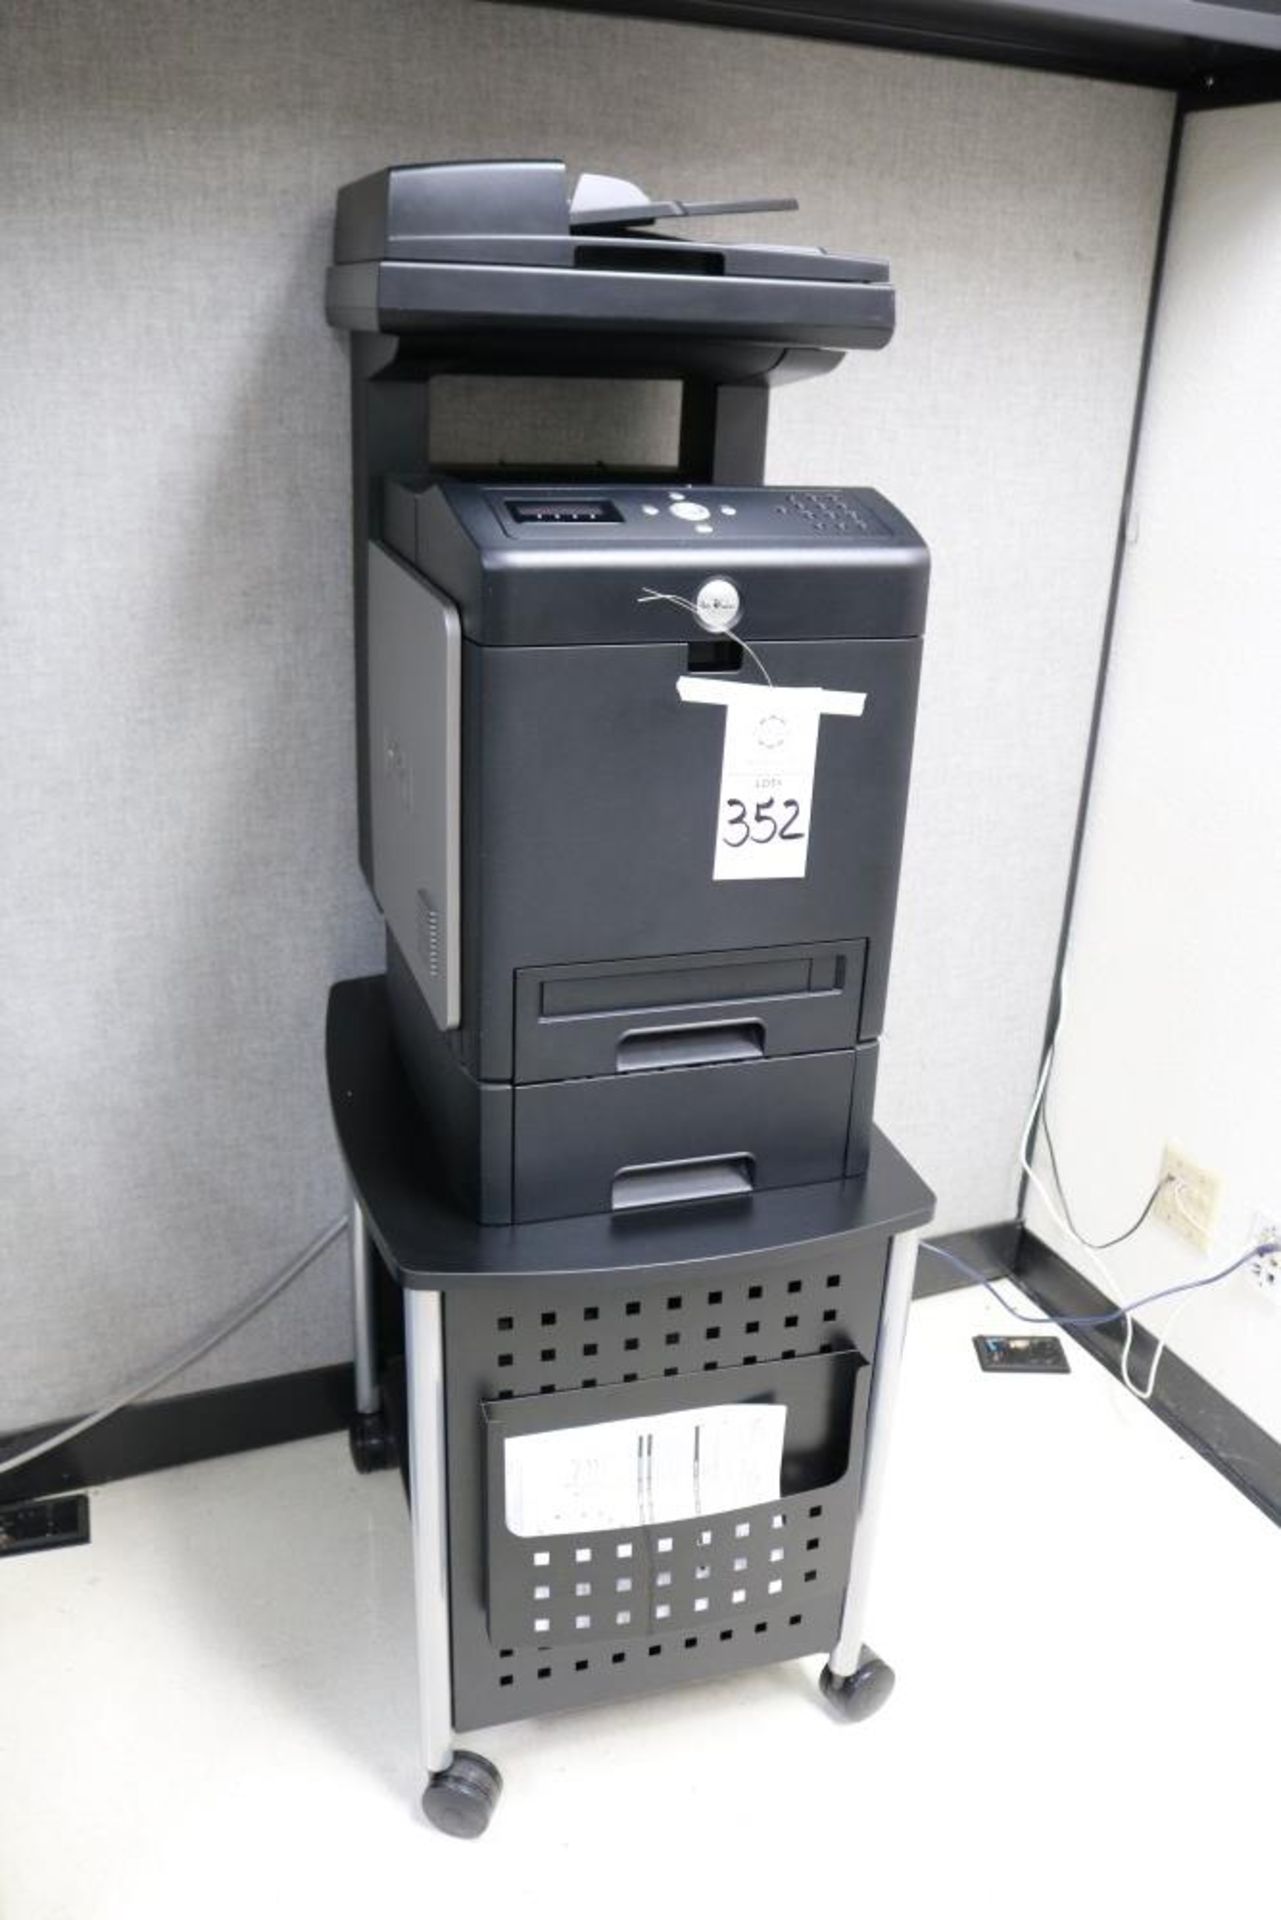 Dell MFP Color Laser Printer, 3115CN, On Small Black Rolling Stand - Image 7 of 7